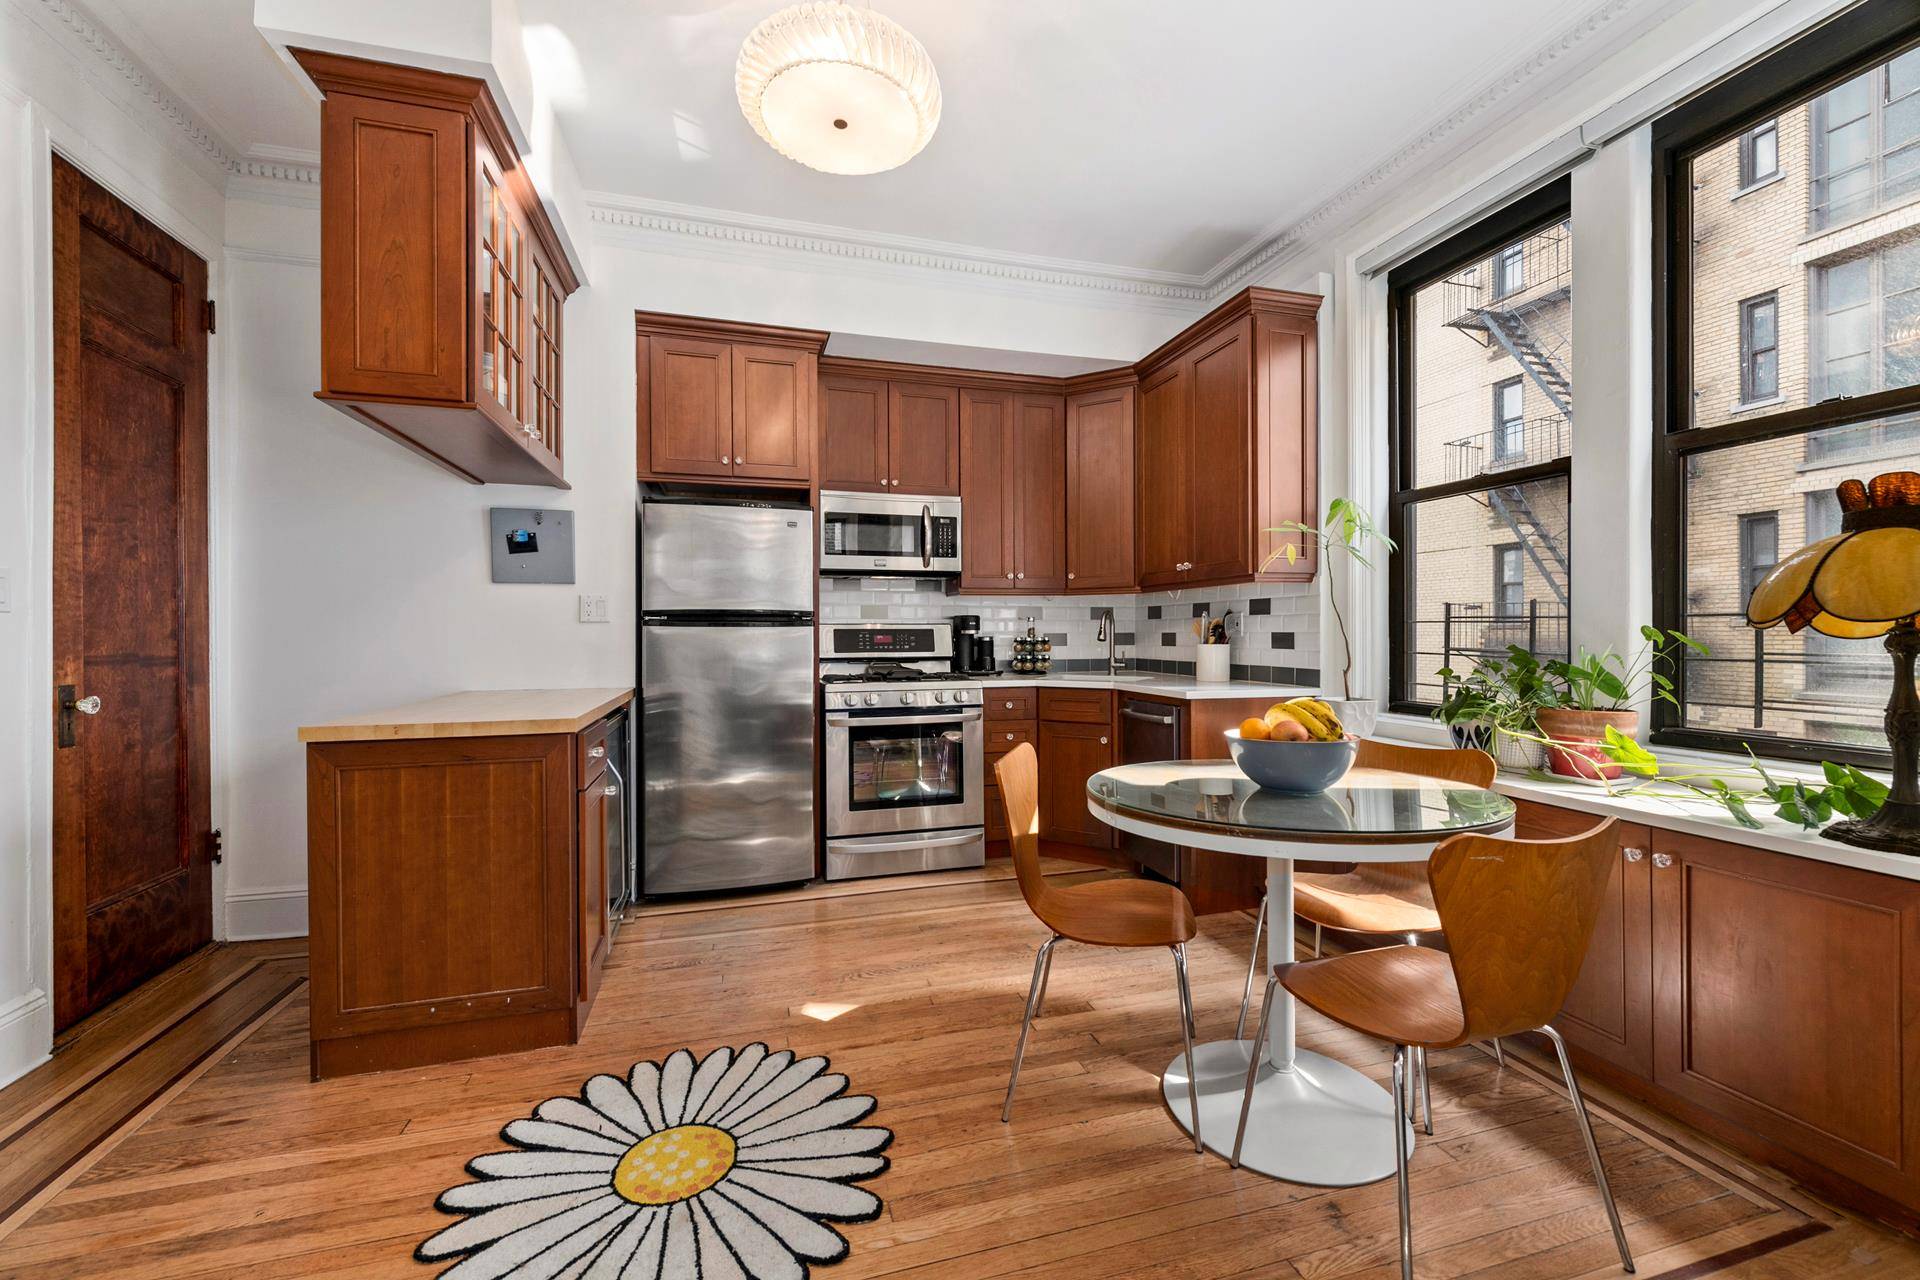 Charming renovated one bed one bath apartment located in the thriving Morningside Heights Columbia University neighborhood.